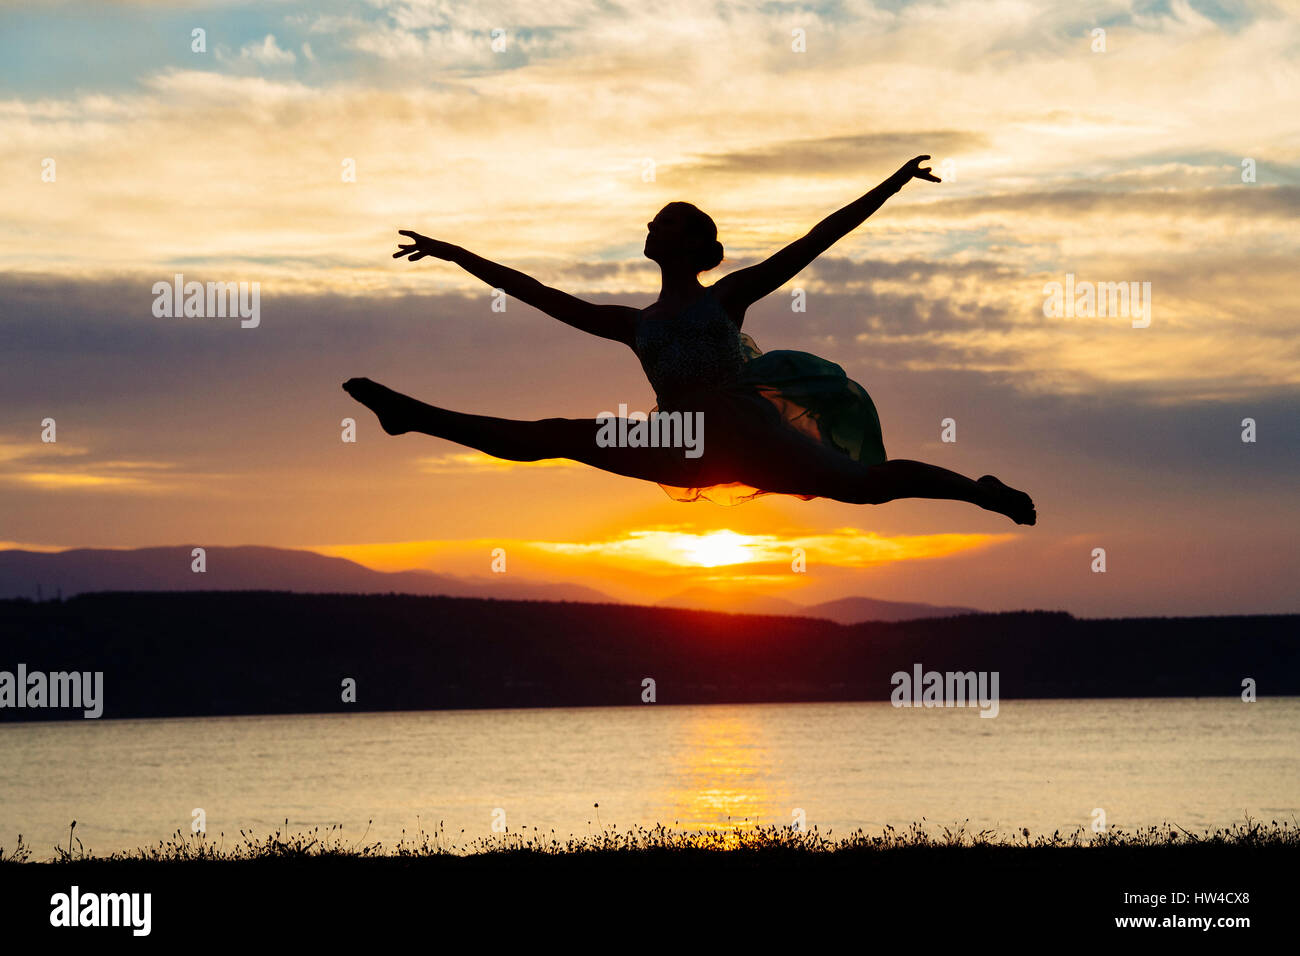 Caucasian ballerina jumping on beach at sunset Banque D'Images